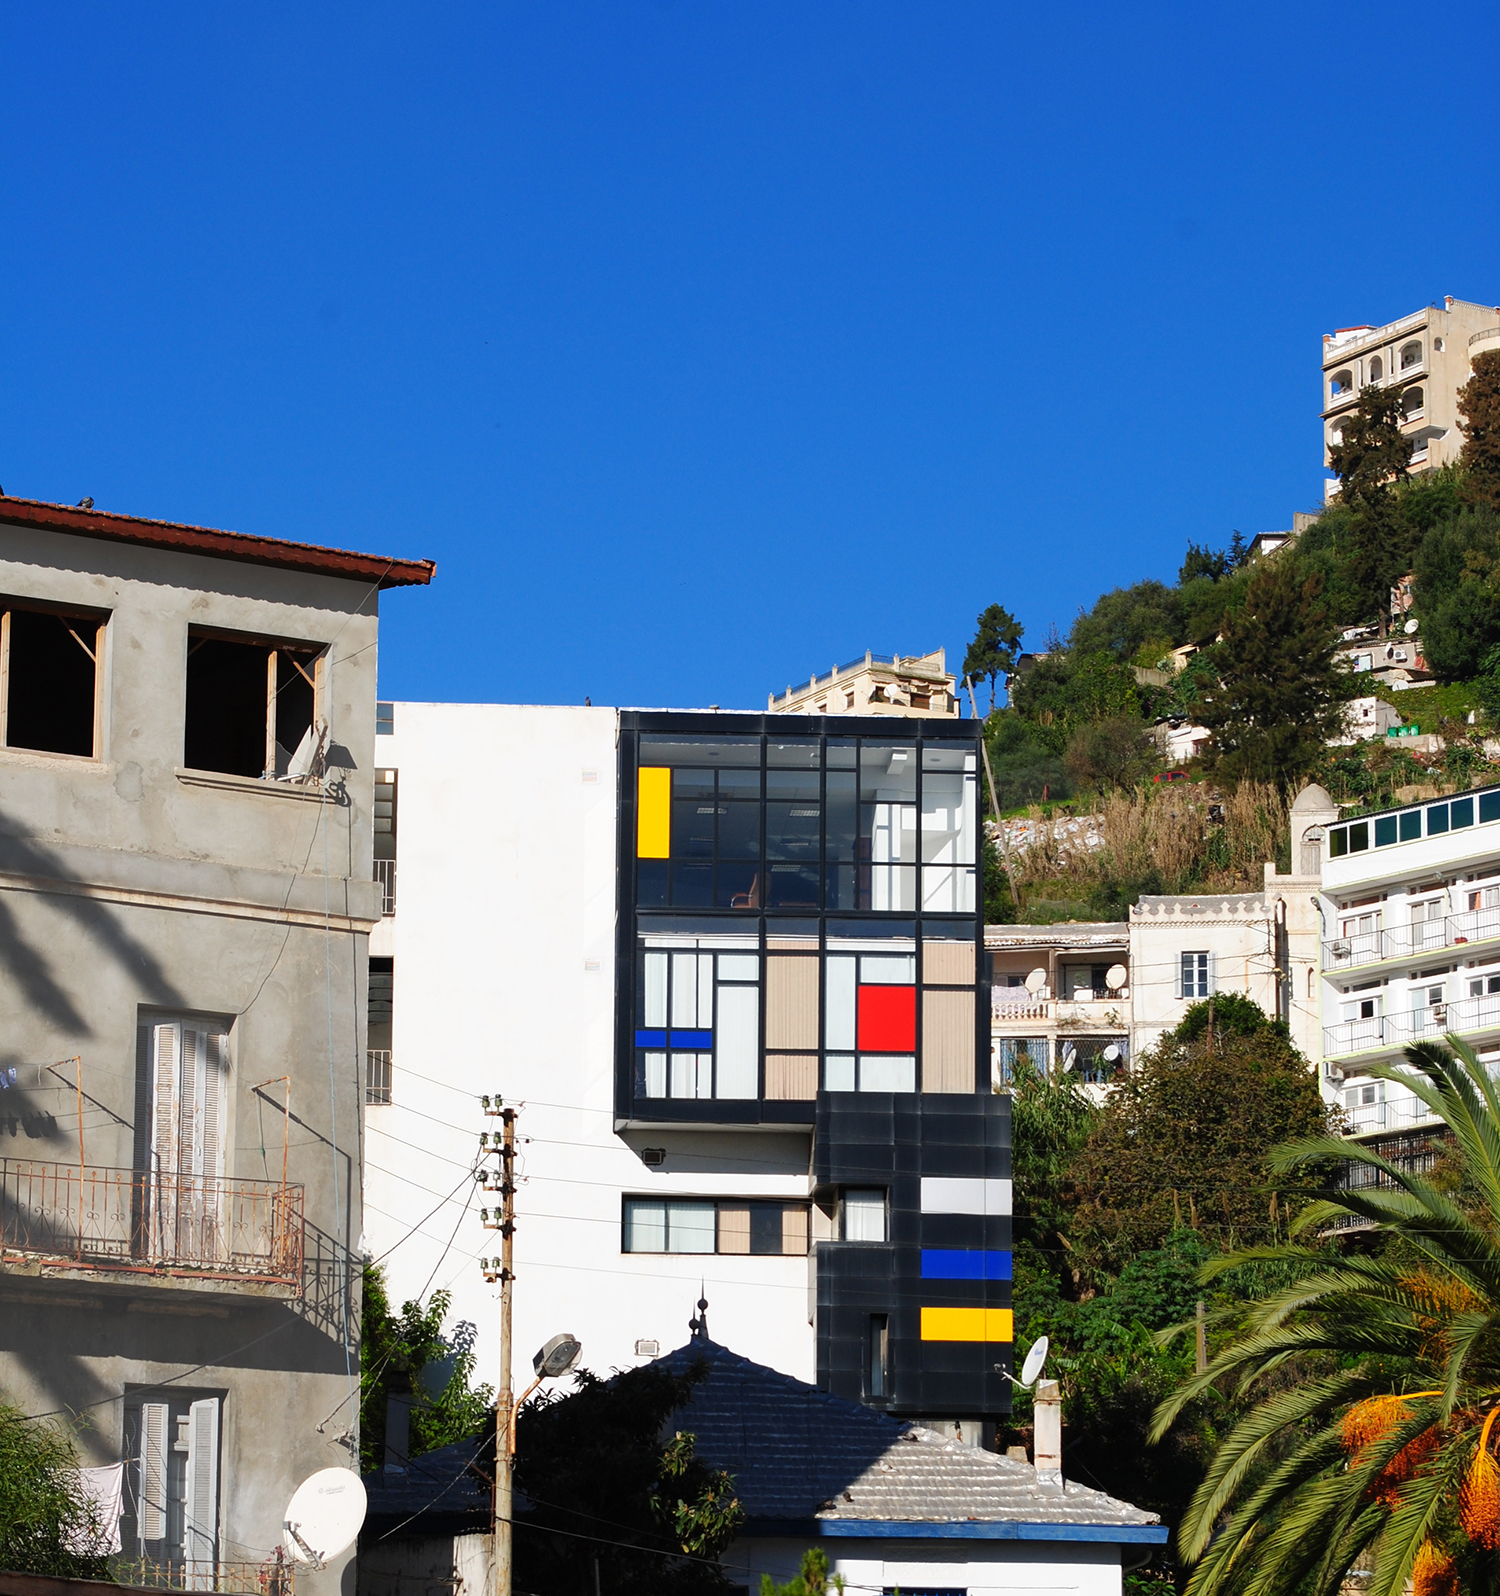 "Hanging a (Mondrian) canvas on the heights of Algiers, clearly indicates that for us the culture can not be limited to local considerations, narrow, outdated, but must embrace this universal hand there is in all of us"  